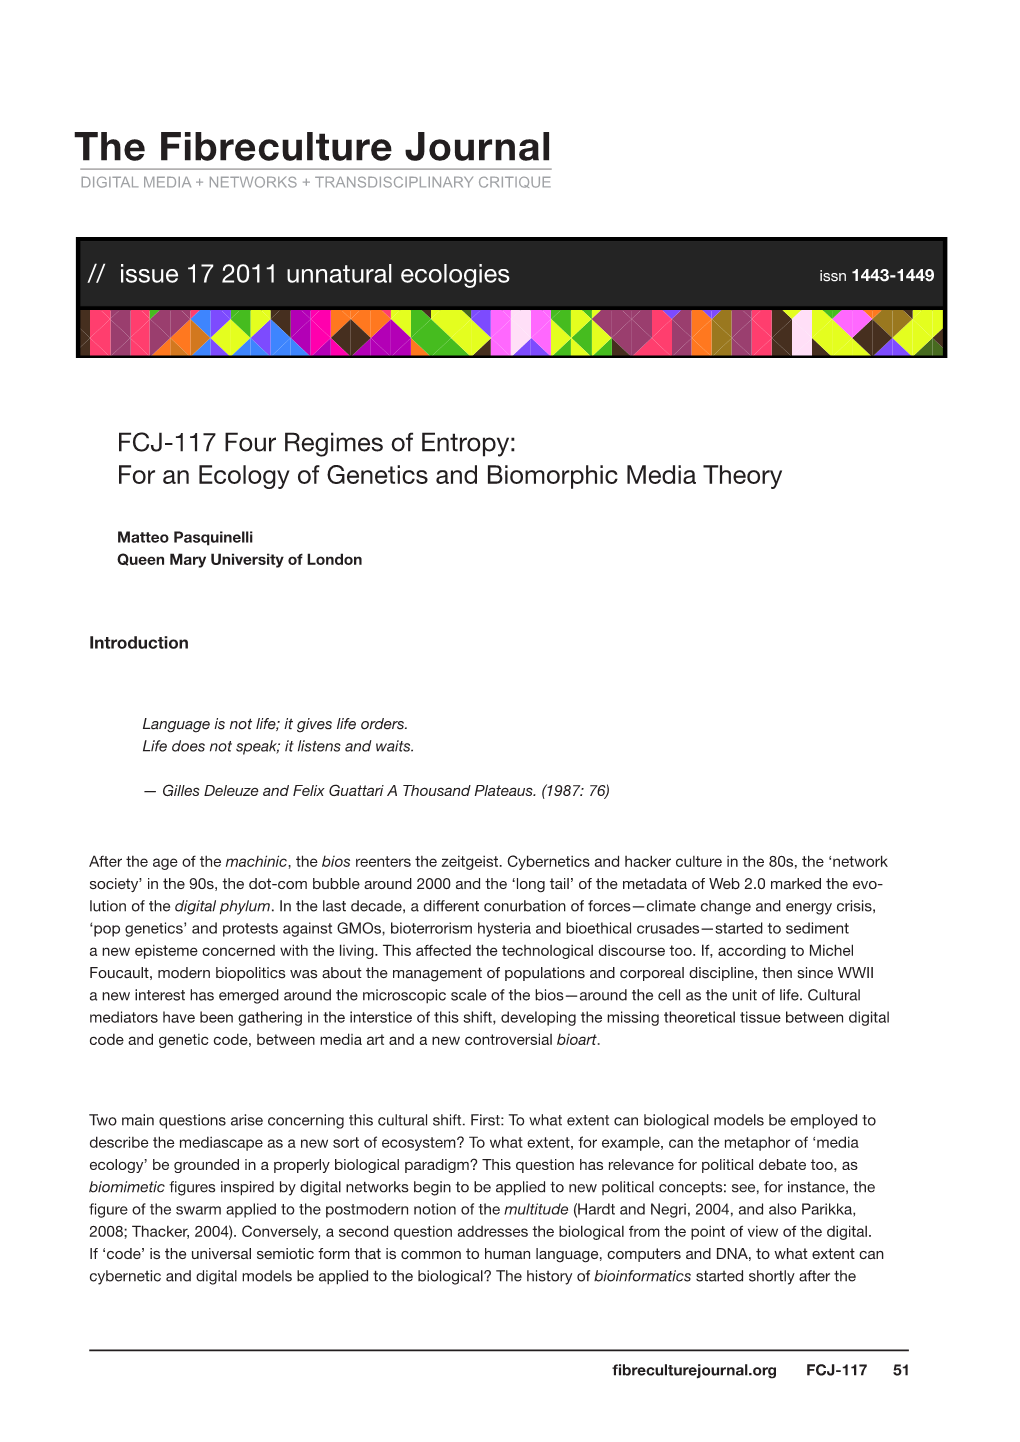 FCJ-118 Four Regimes of Entropy: for an Ecology of Genetics And